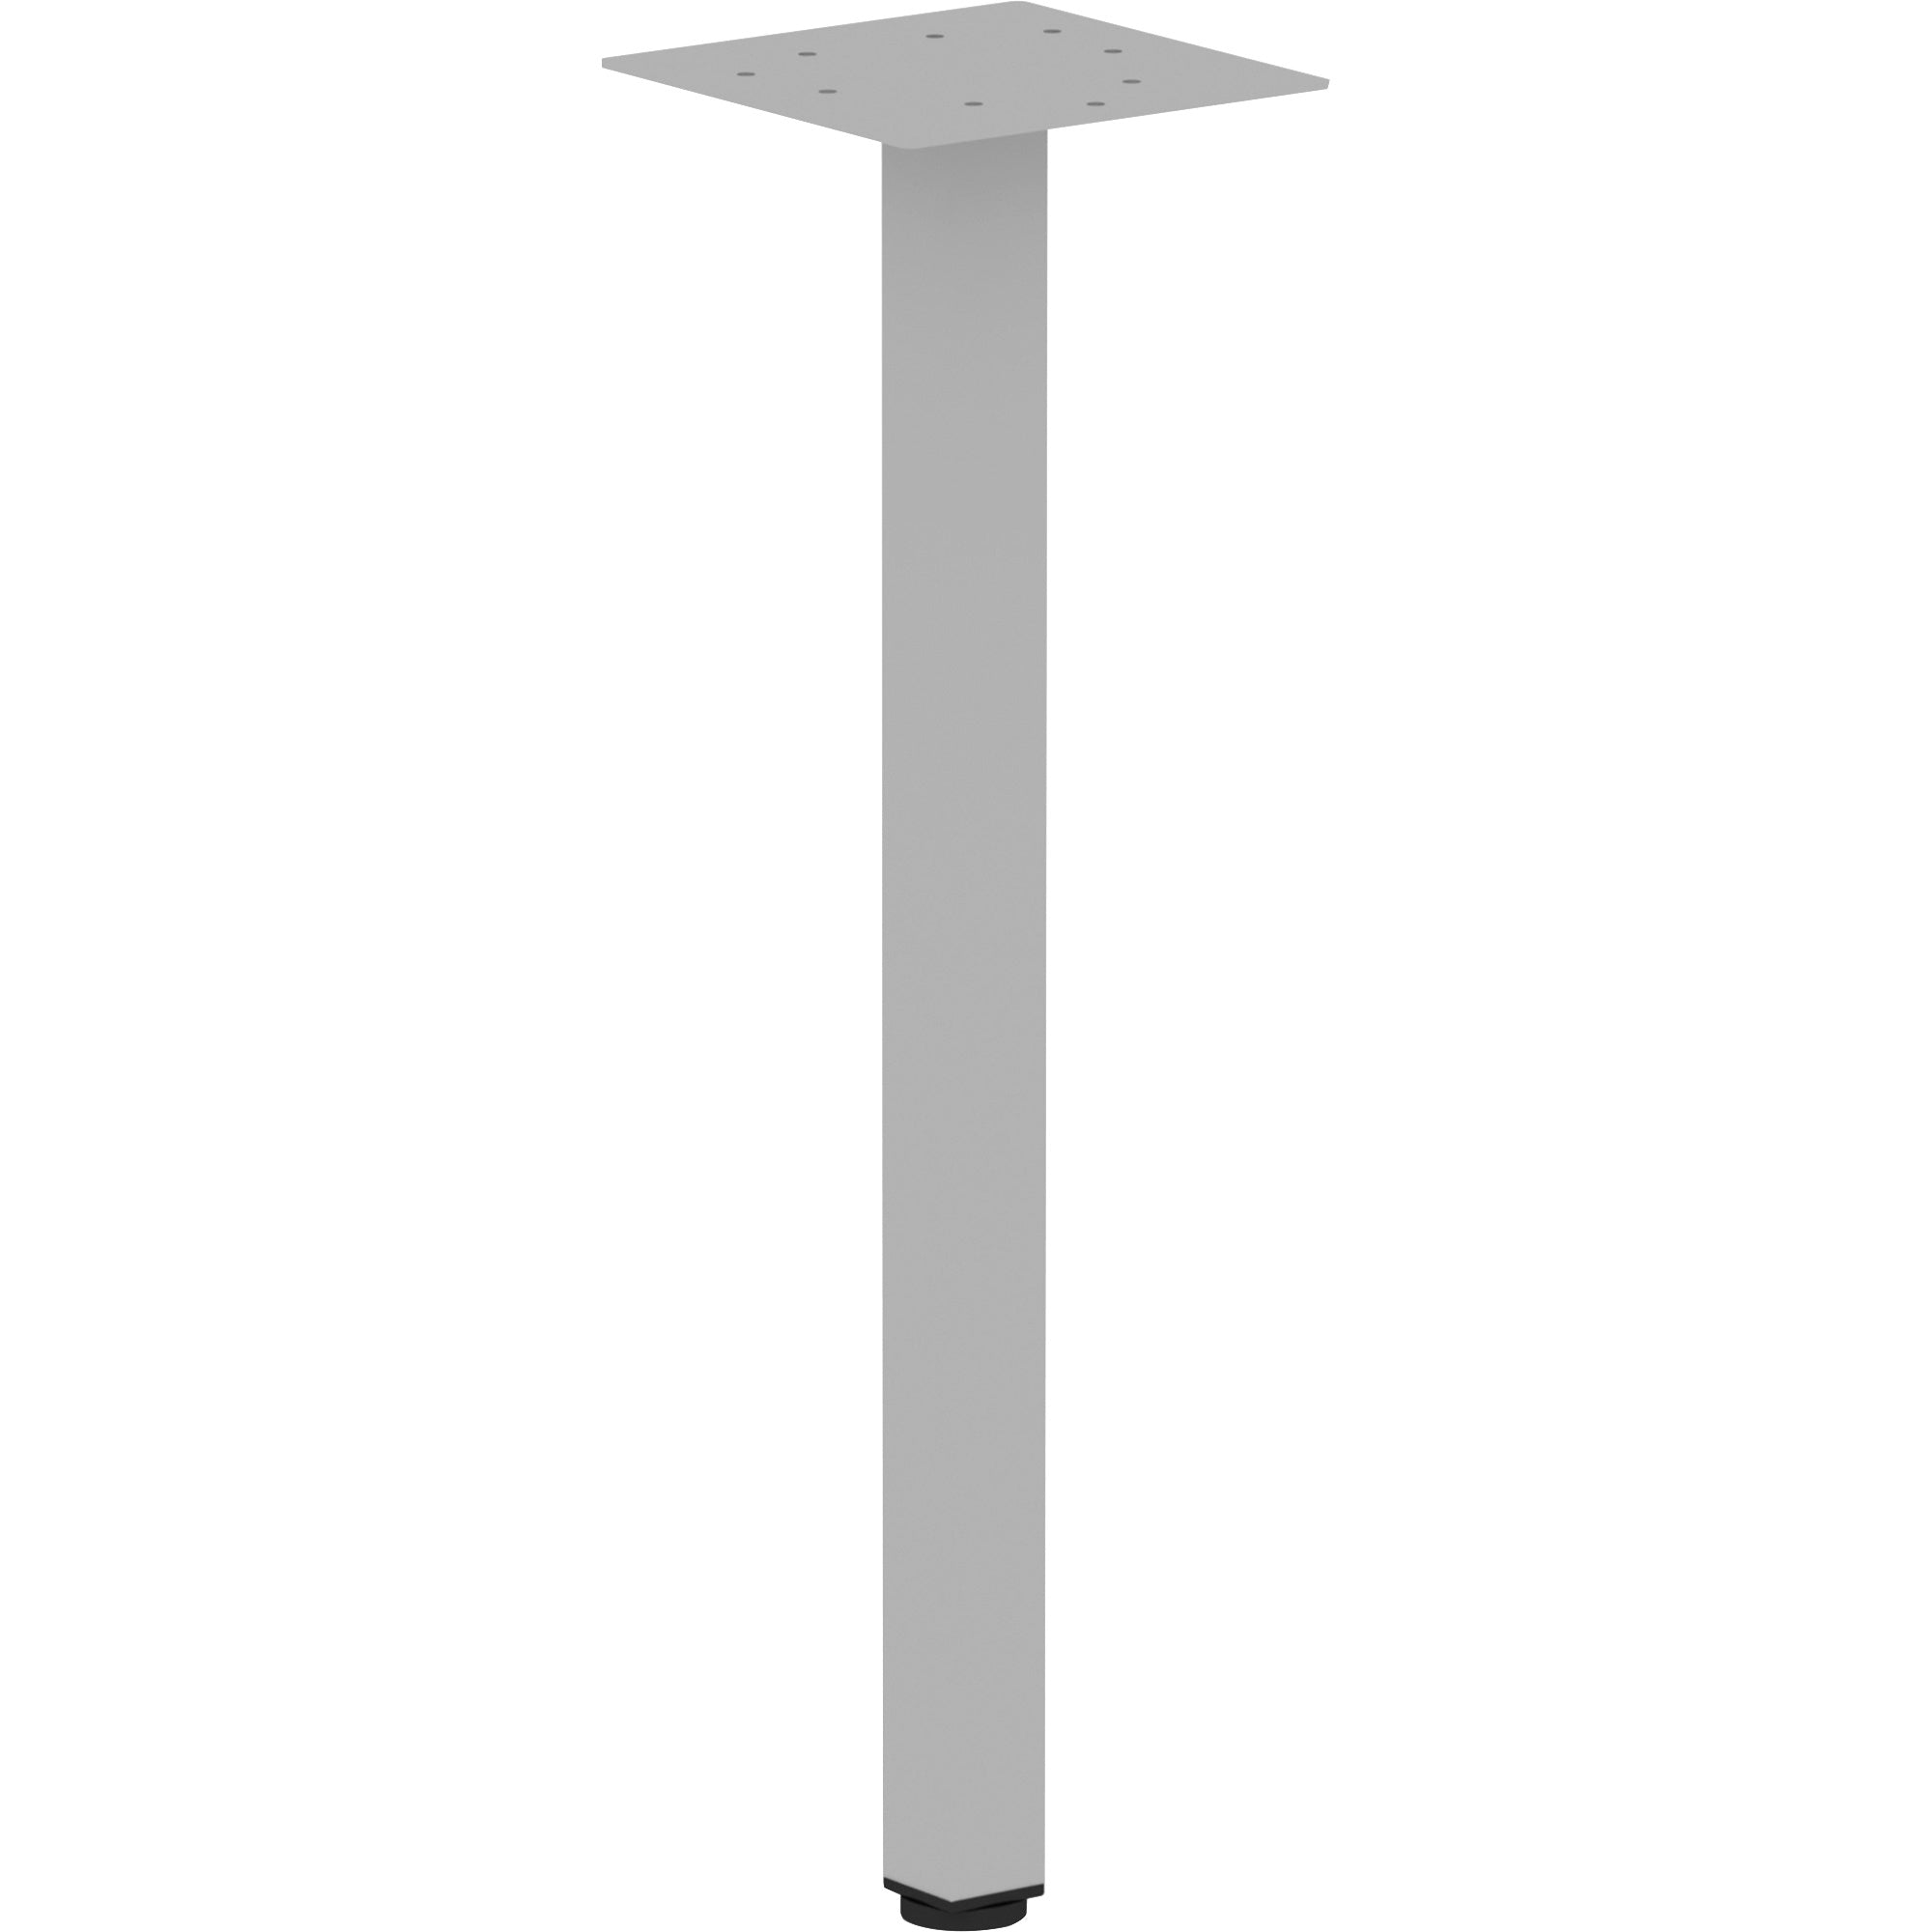 Lorell Relevance Series Offset Square Leg - Powder Coated Silver Square Leg Base - 28.50" Height x 7.87" Width - Assembly Required - 1 Each - 1